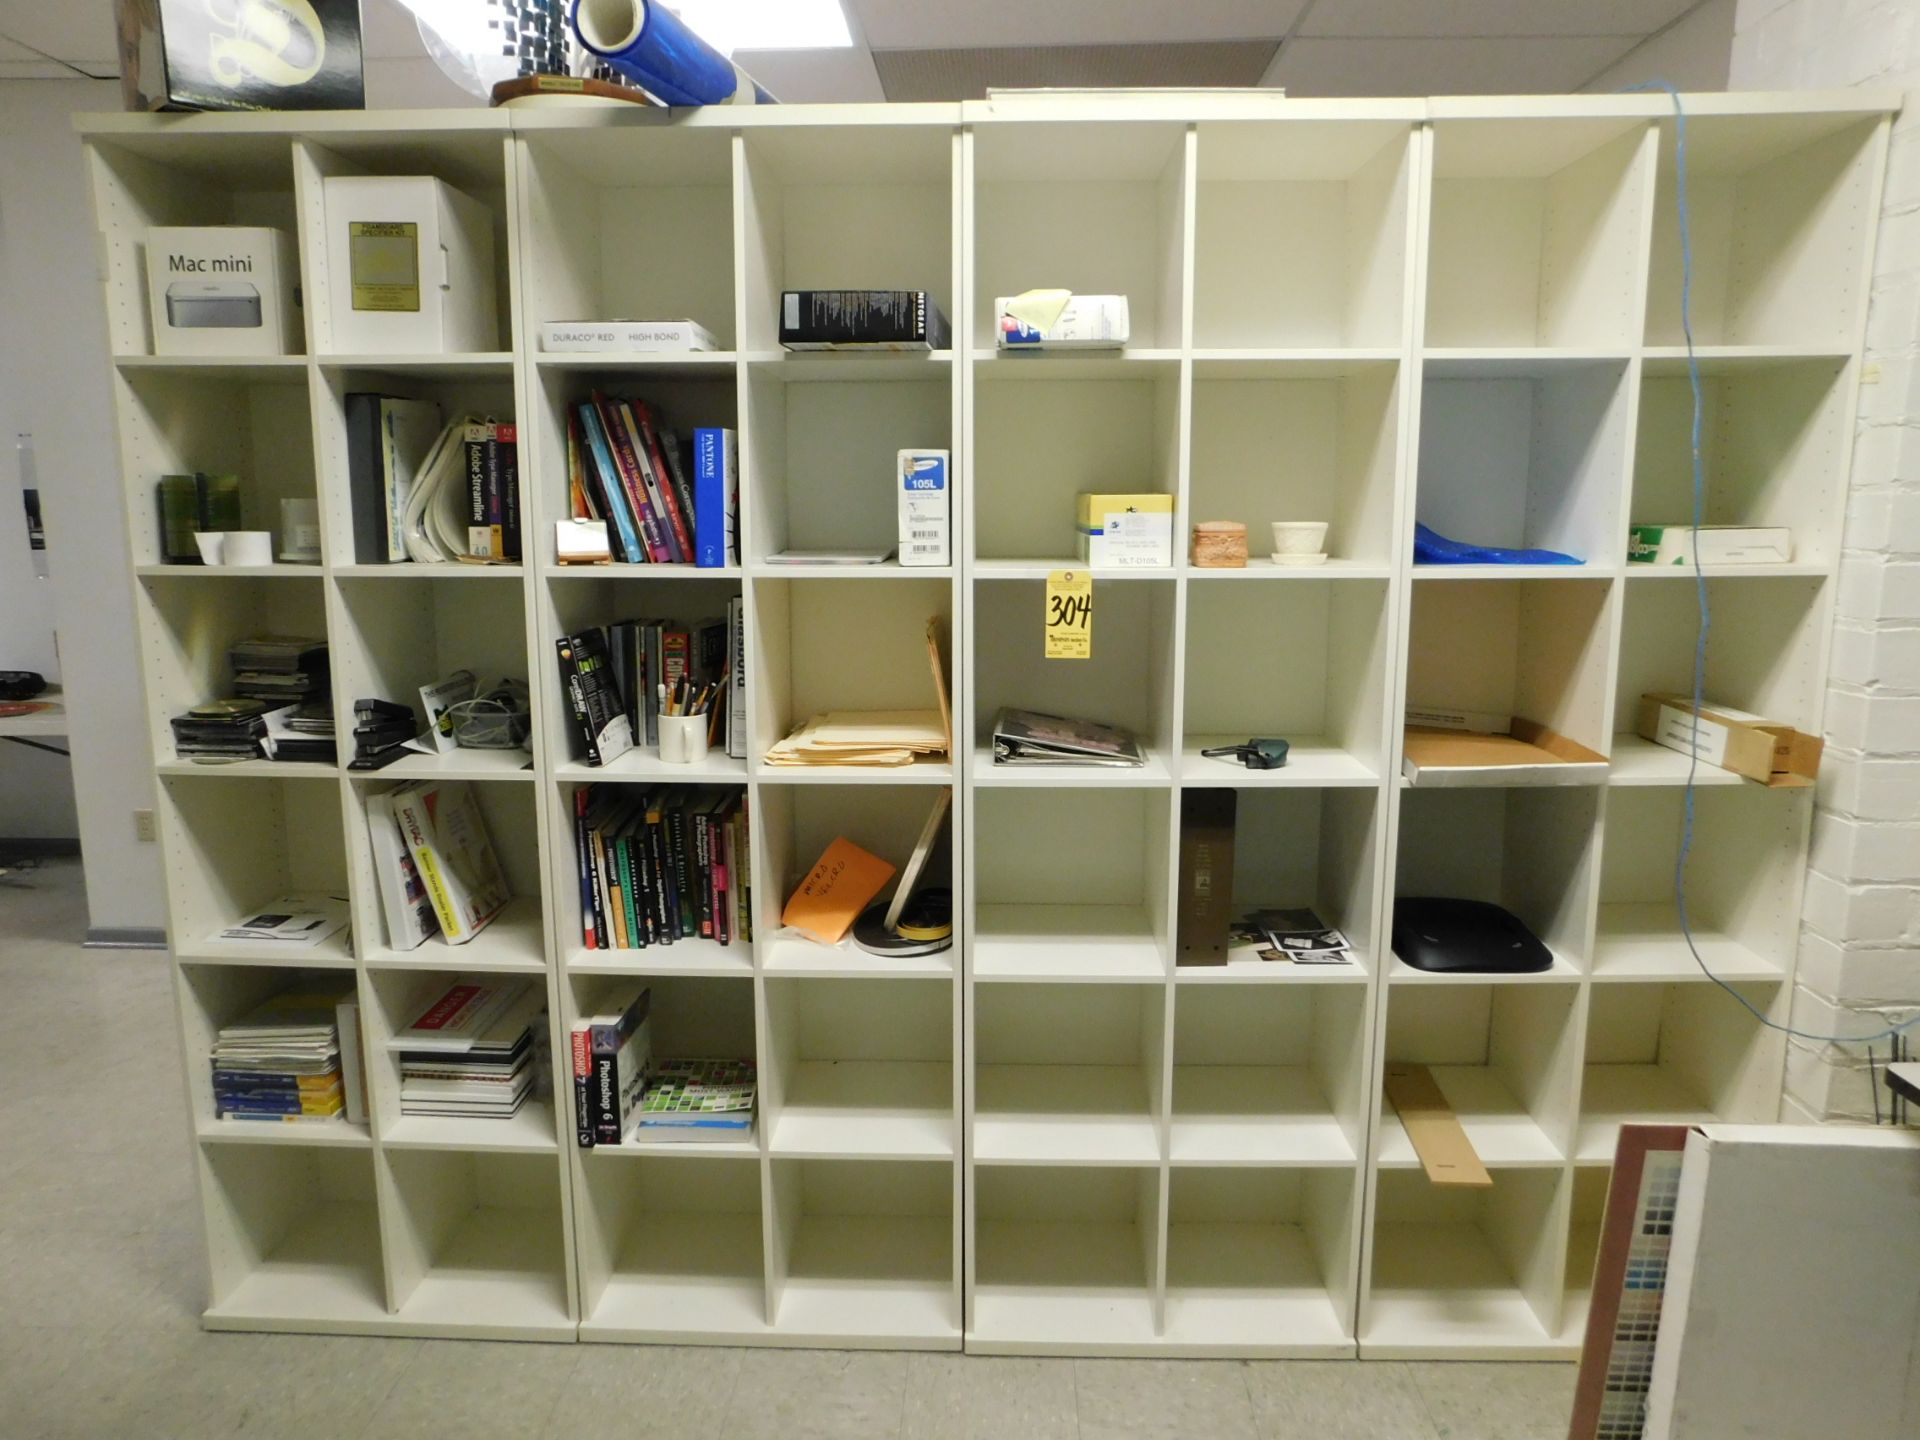 Shelving and Contents